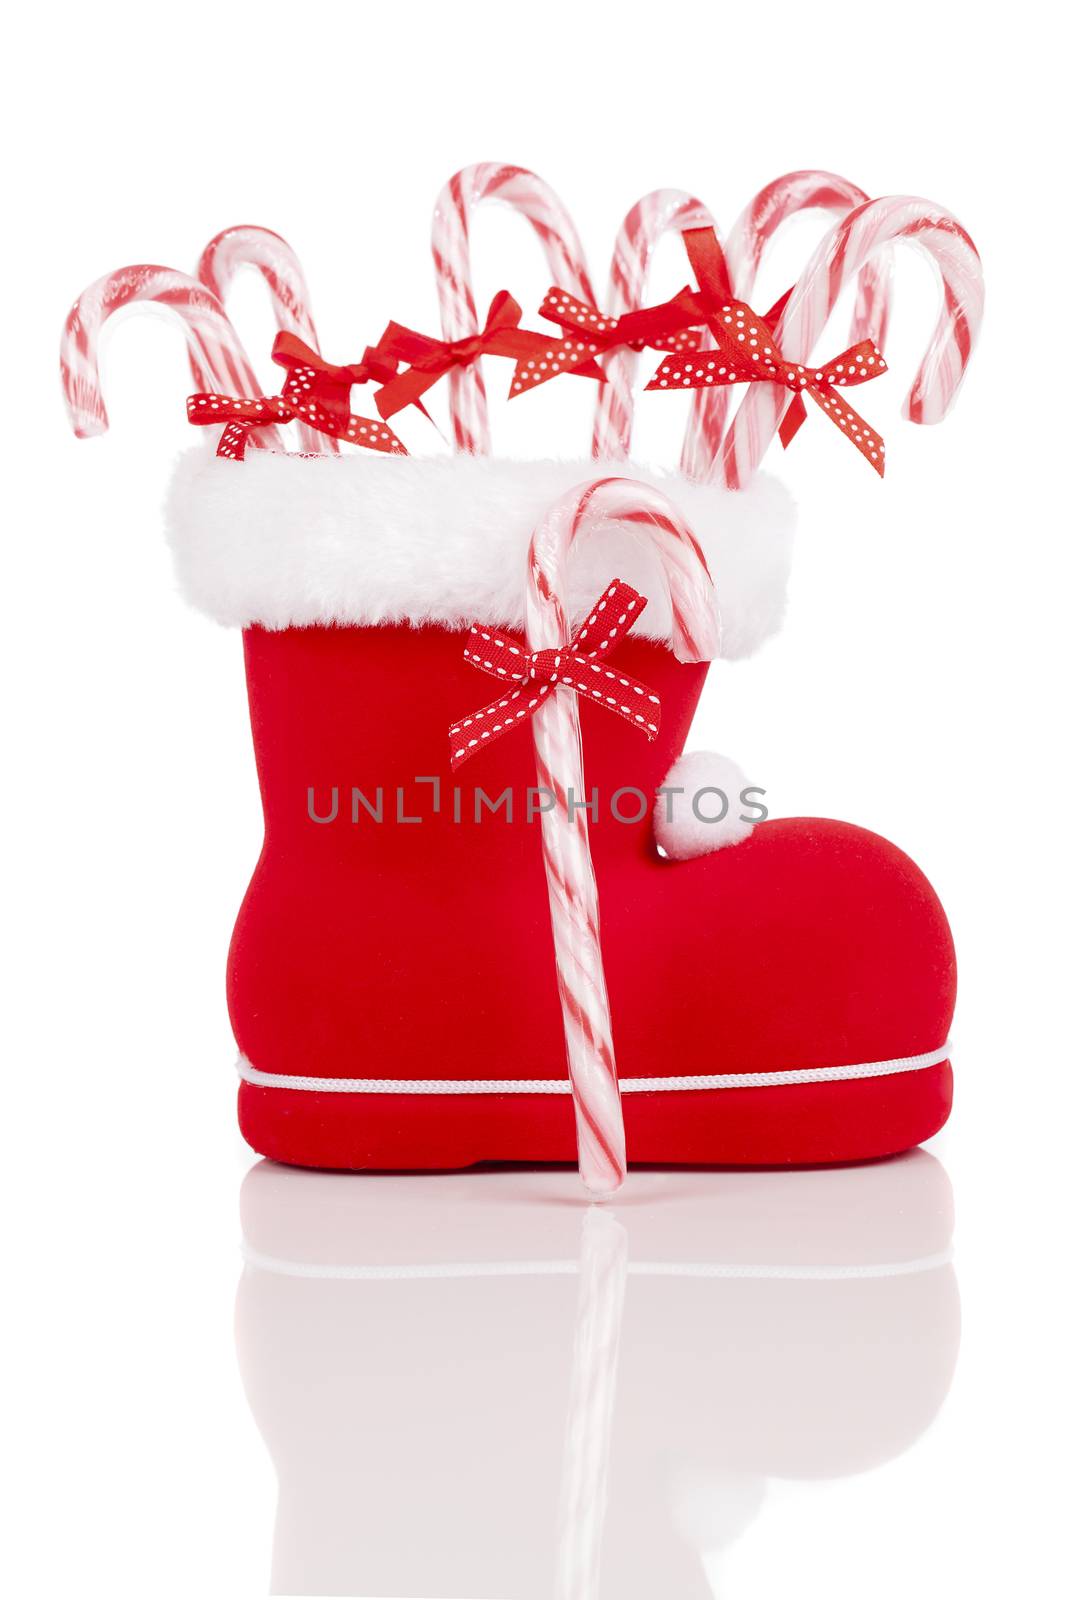 Santa's boot with candy canes on white background